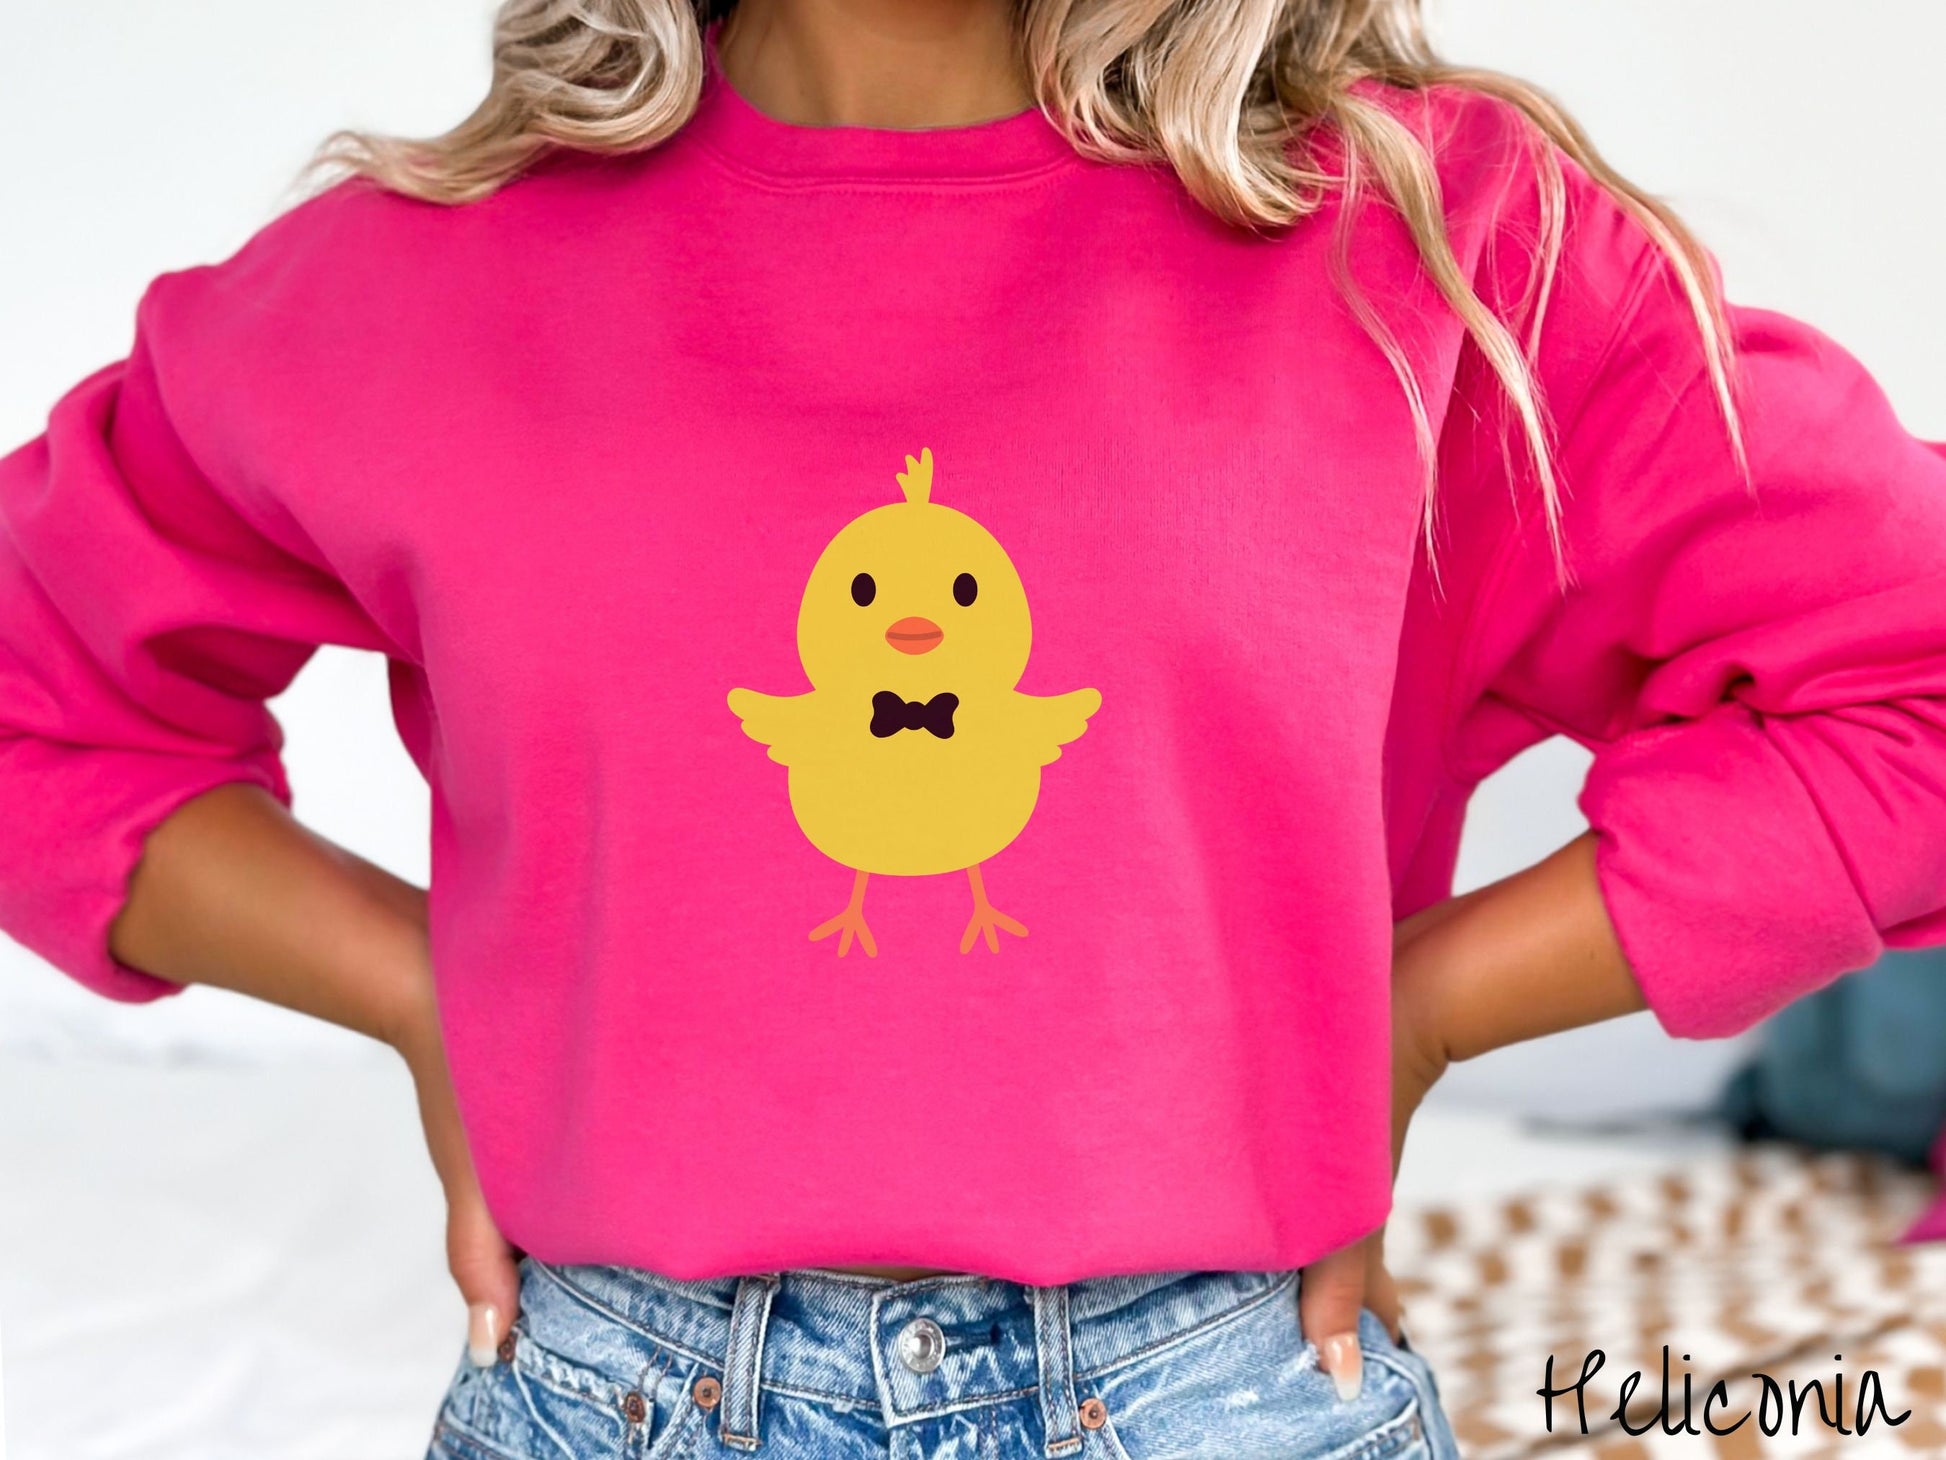 A woman wearing a cute, vintage heliconia colored sweatshirt with a yellow baby chick with a black bowtie and its wings spread is standing and smiling. It has an orange mouth and feet and yellow feathers sticking out the top of its head.